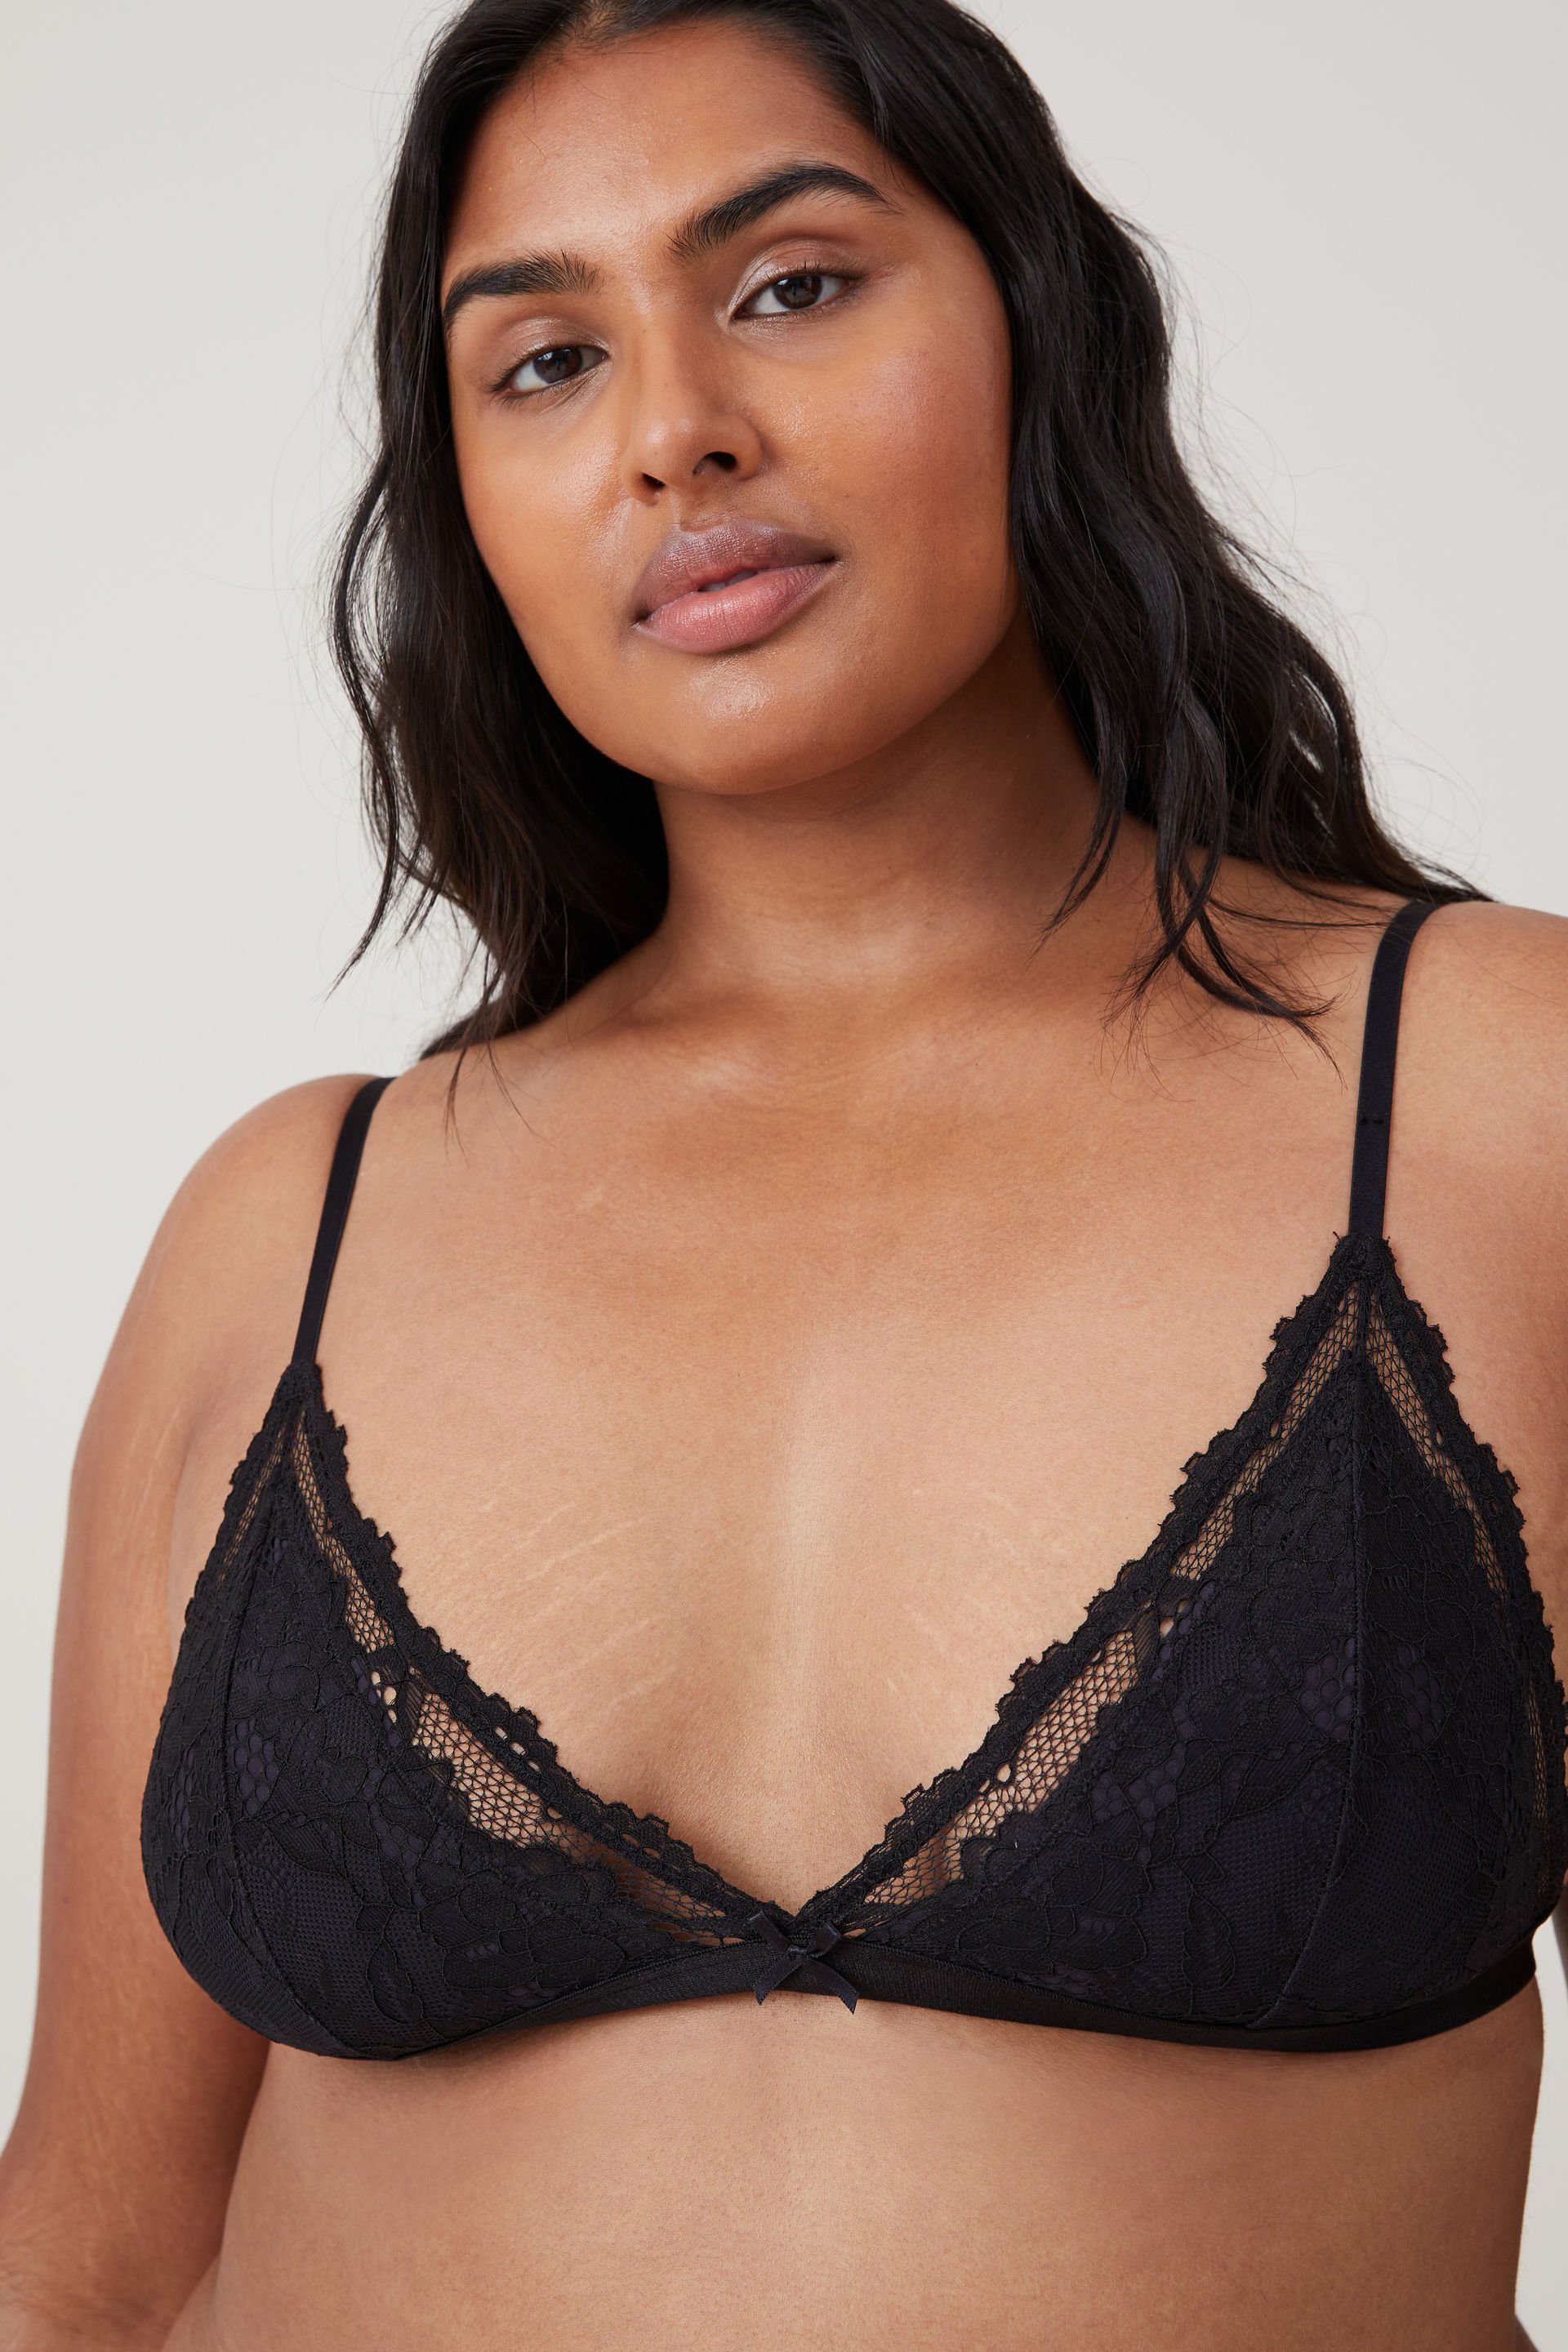 Cotton:On gathered front backless bralette in black - part of a set